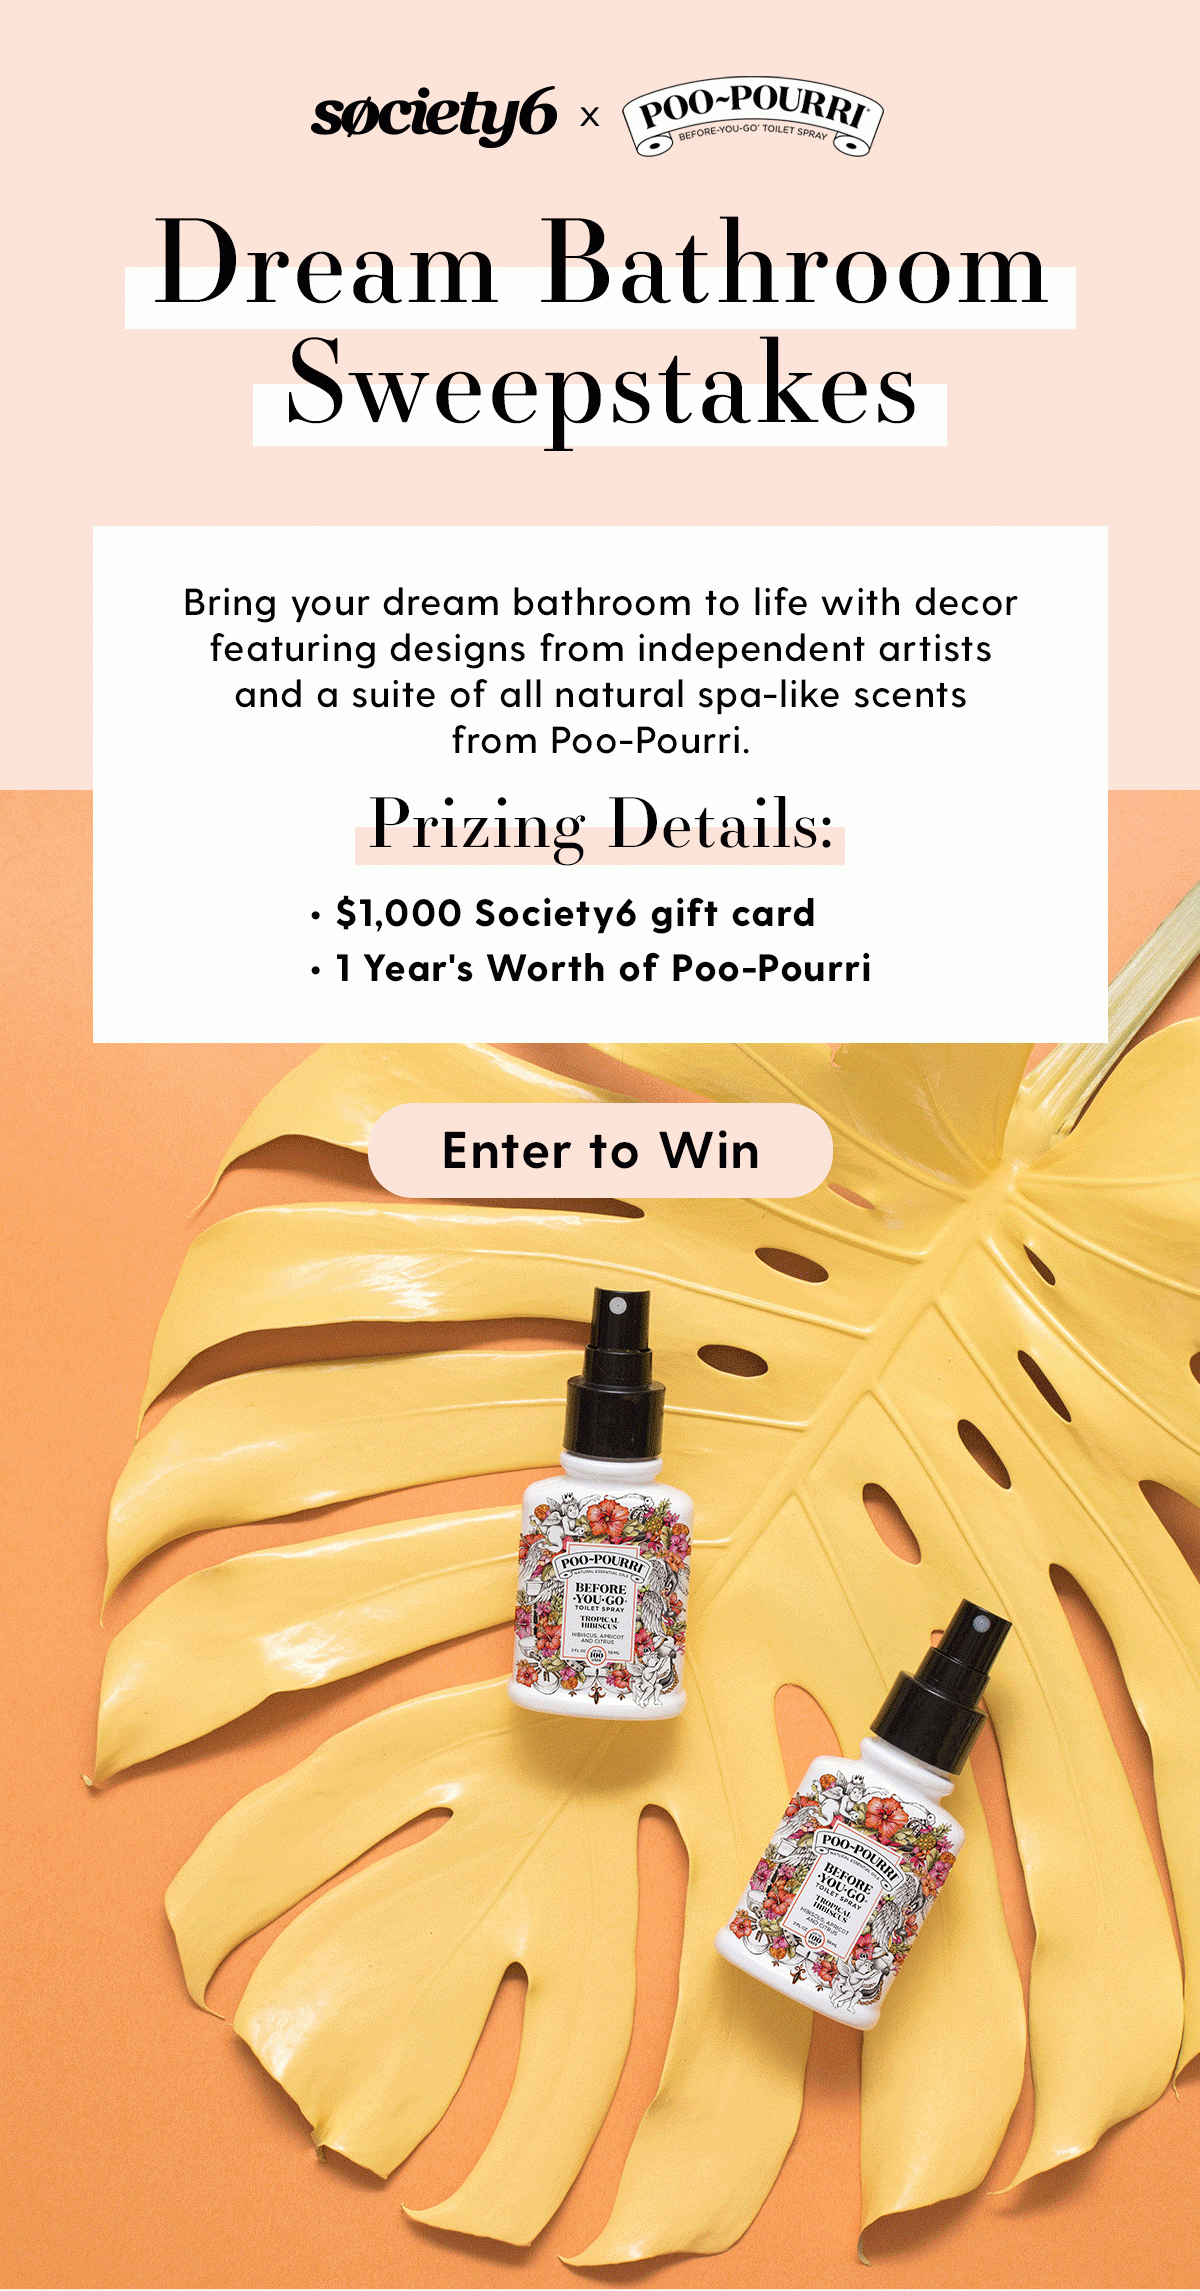 Society6 x Poo-Pourri Dream Bathroom Sweepstakes Bring your dream bathroom to life with decor featuring designs from independent artists and a suite of all natural spa-like scents from Poo-Pourri. Prizing Details: - $1,000 Society6 gift card - 1 Year's Worth of Poo-Pourri Enter to Win